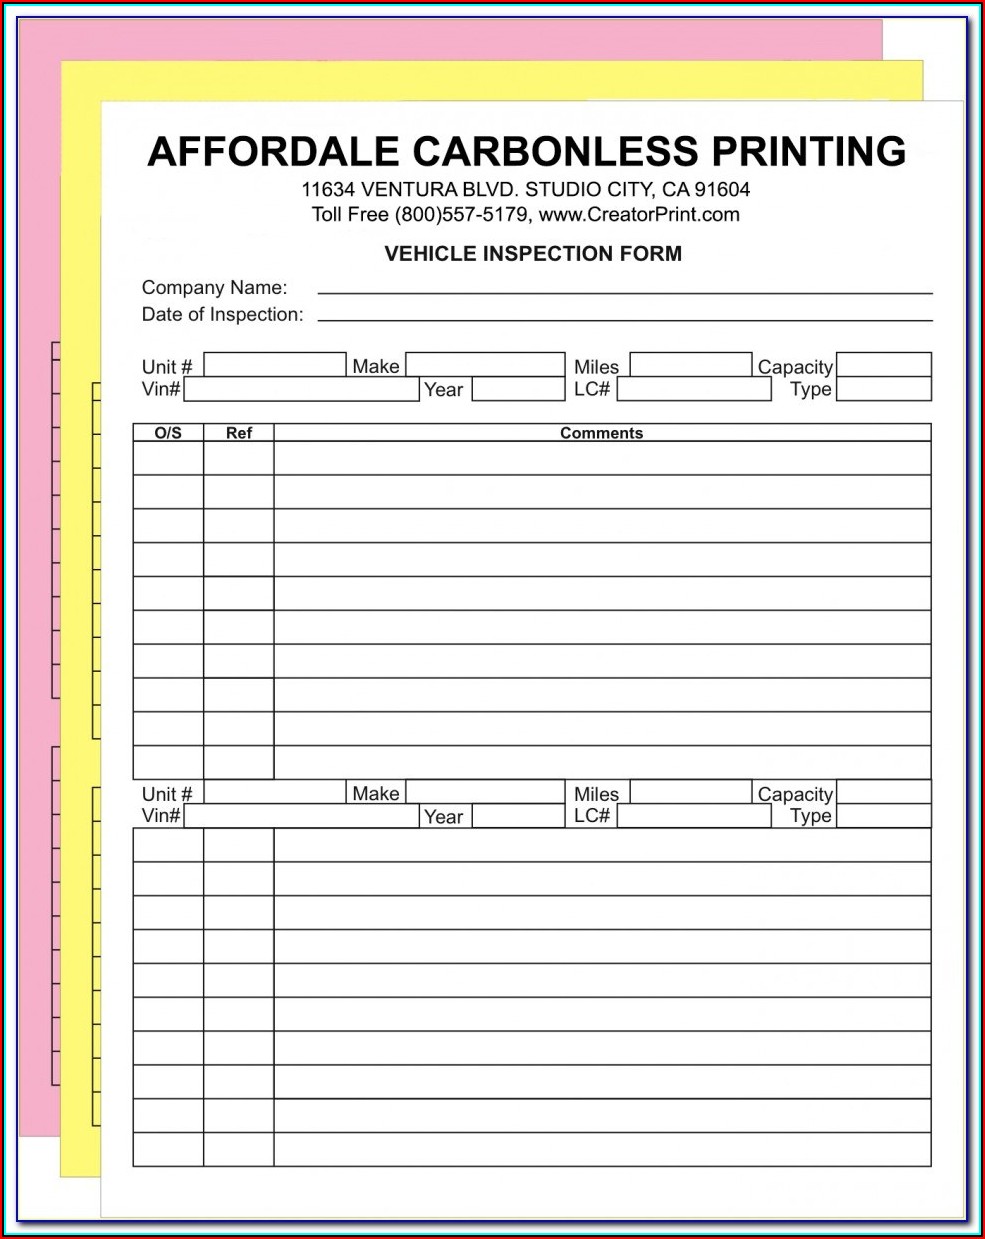 Carbonless Forms Printing Philippines